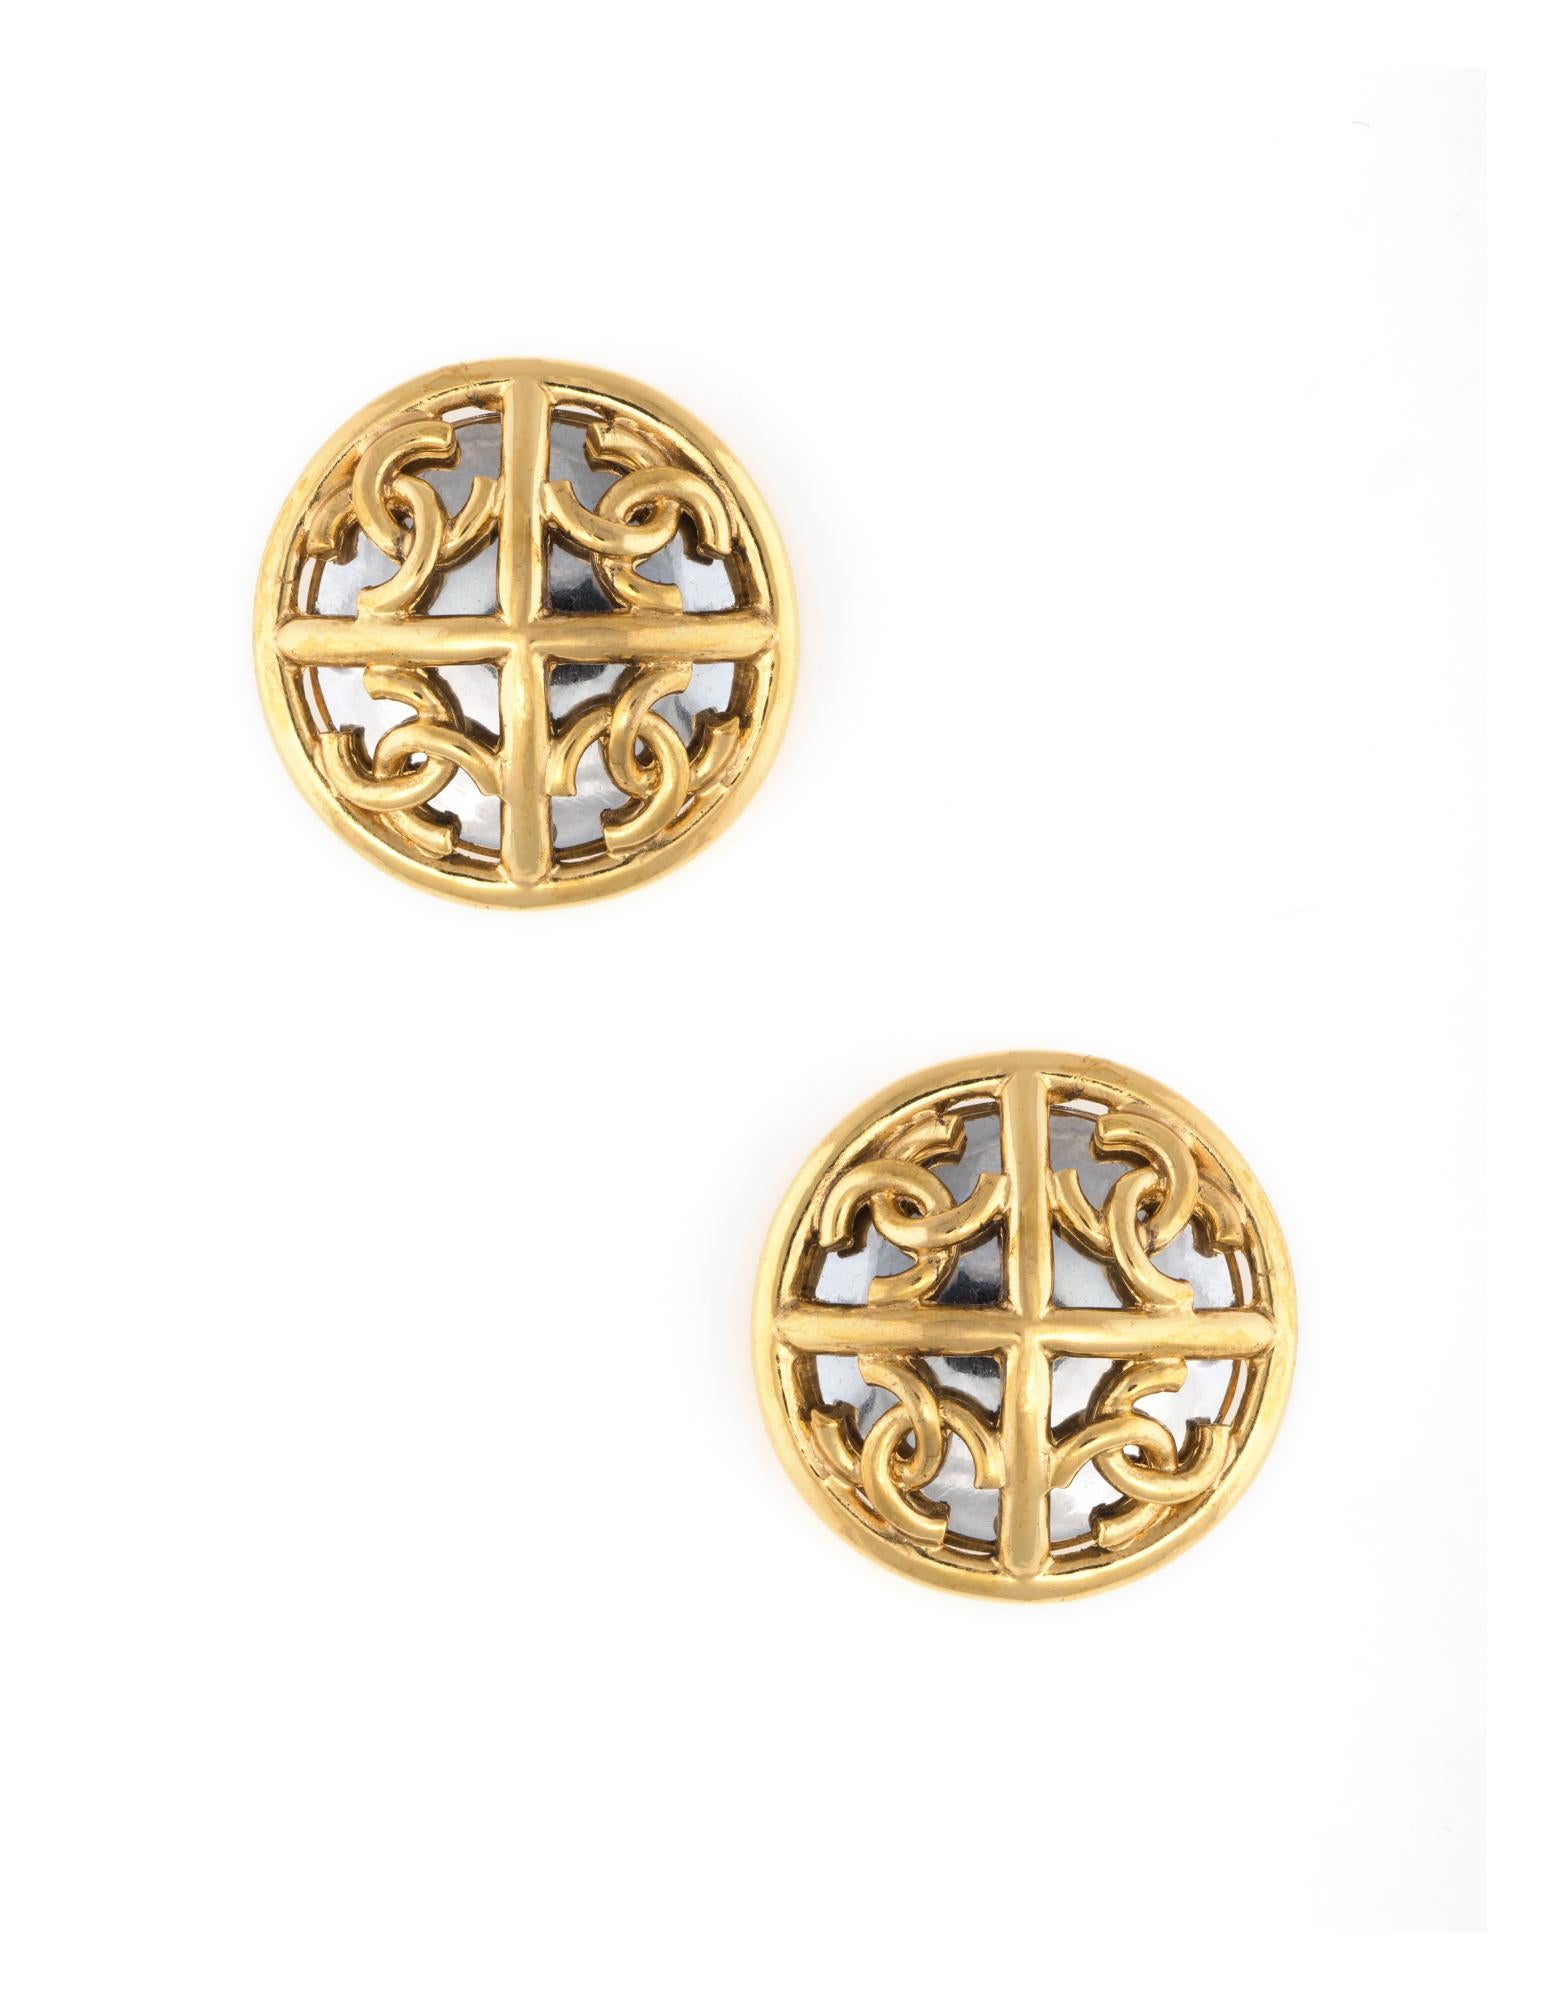 Modern Vintage Chanel Mirror Clip Earrings Large Round Yellow Gold Tone CC Logo